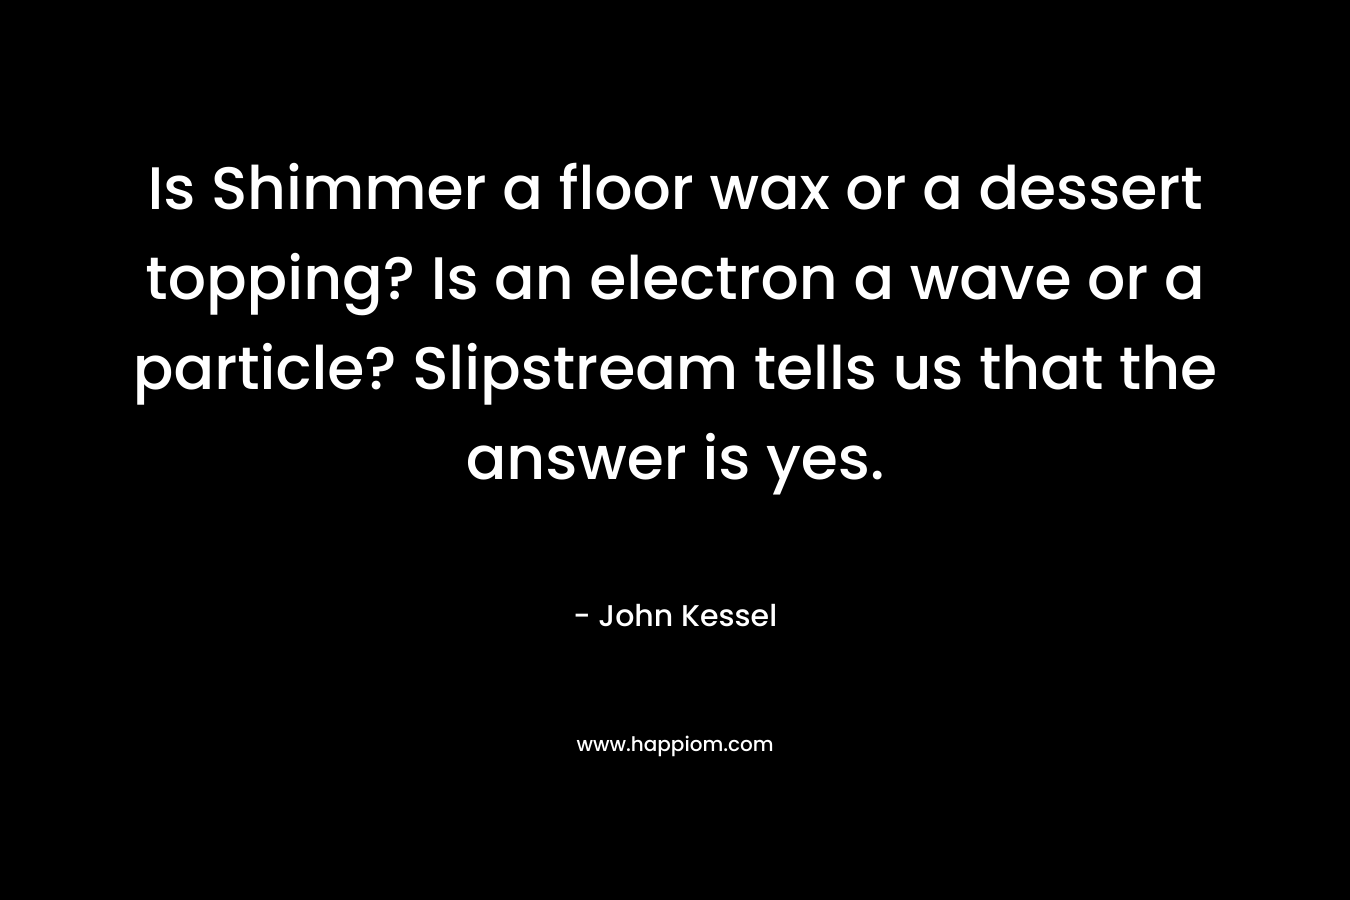 Is Shimmer a floor wax or a dessert topping? Is an electron a wave or a particle? Slipstream tells us that the answer is yes. – John Kessel